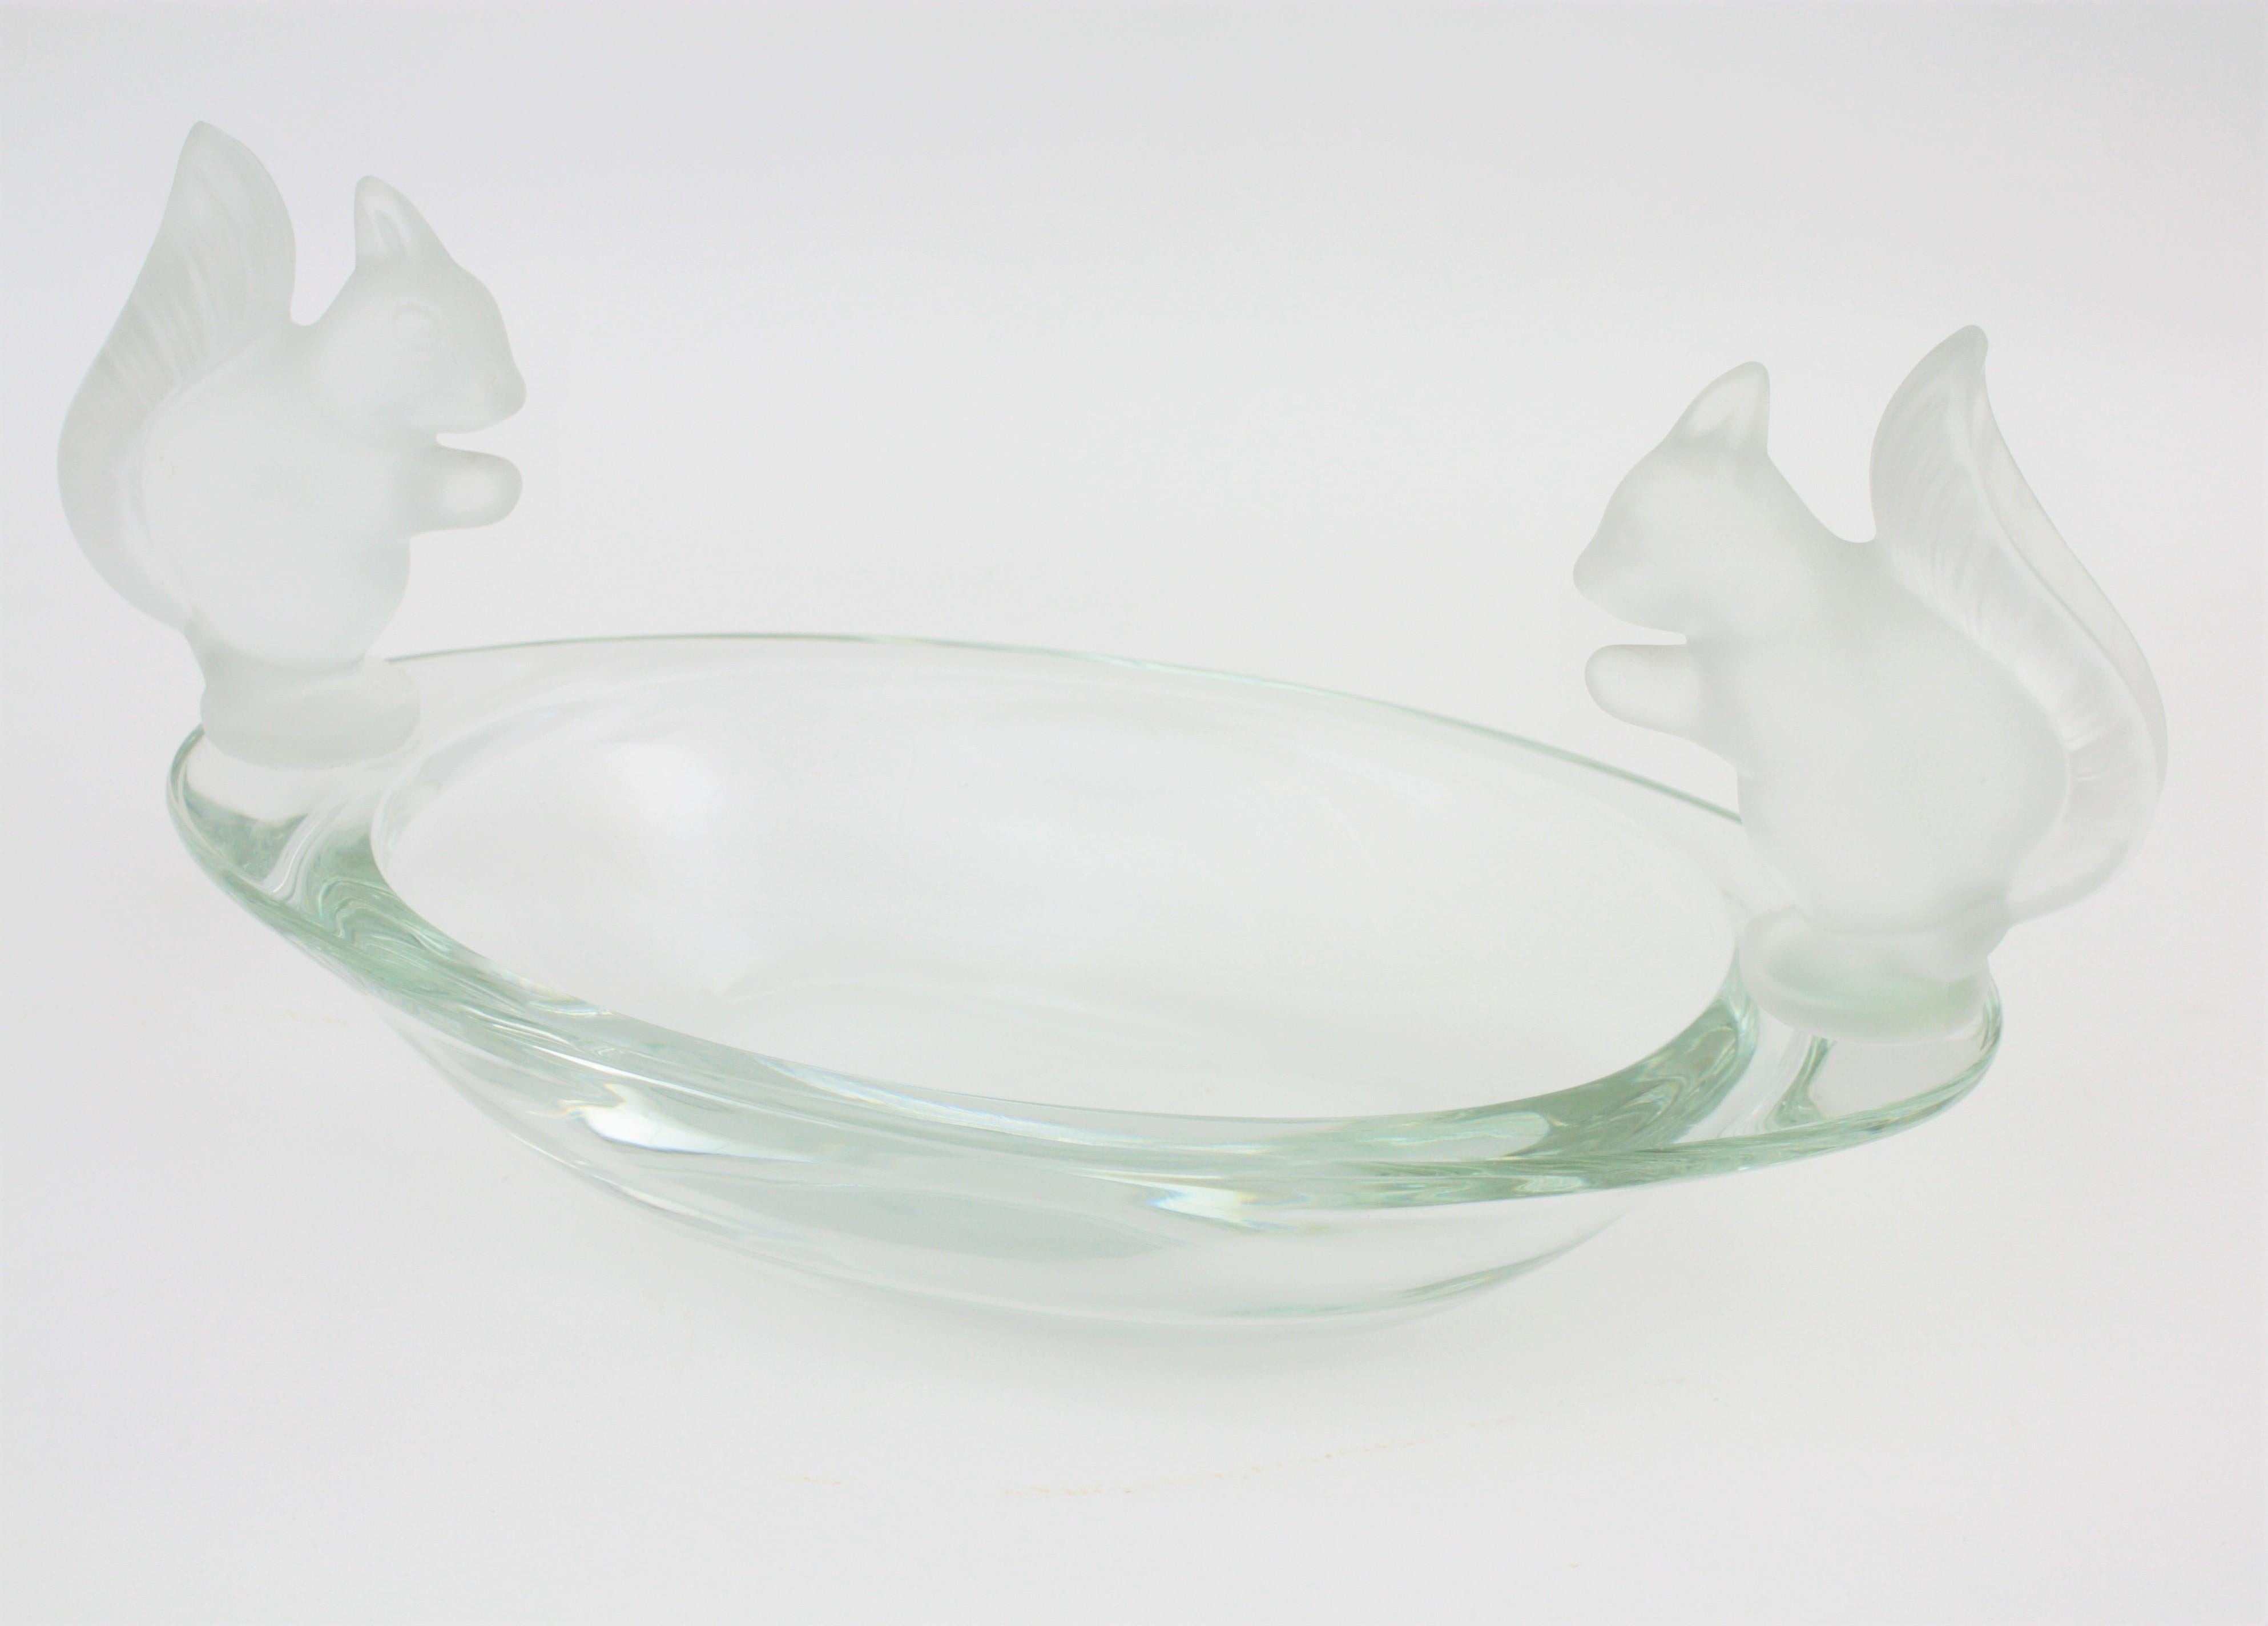 20th Century French Sevres Crystal Oval Bowl Decorated by Frosted Crystal Squirrel Figures